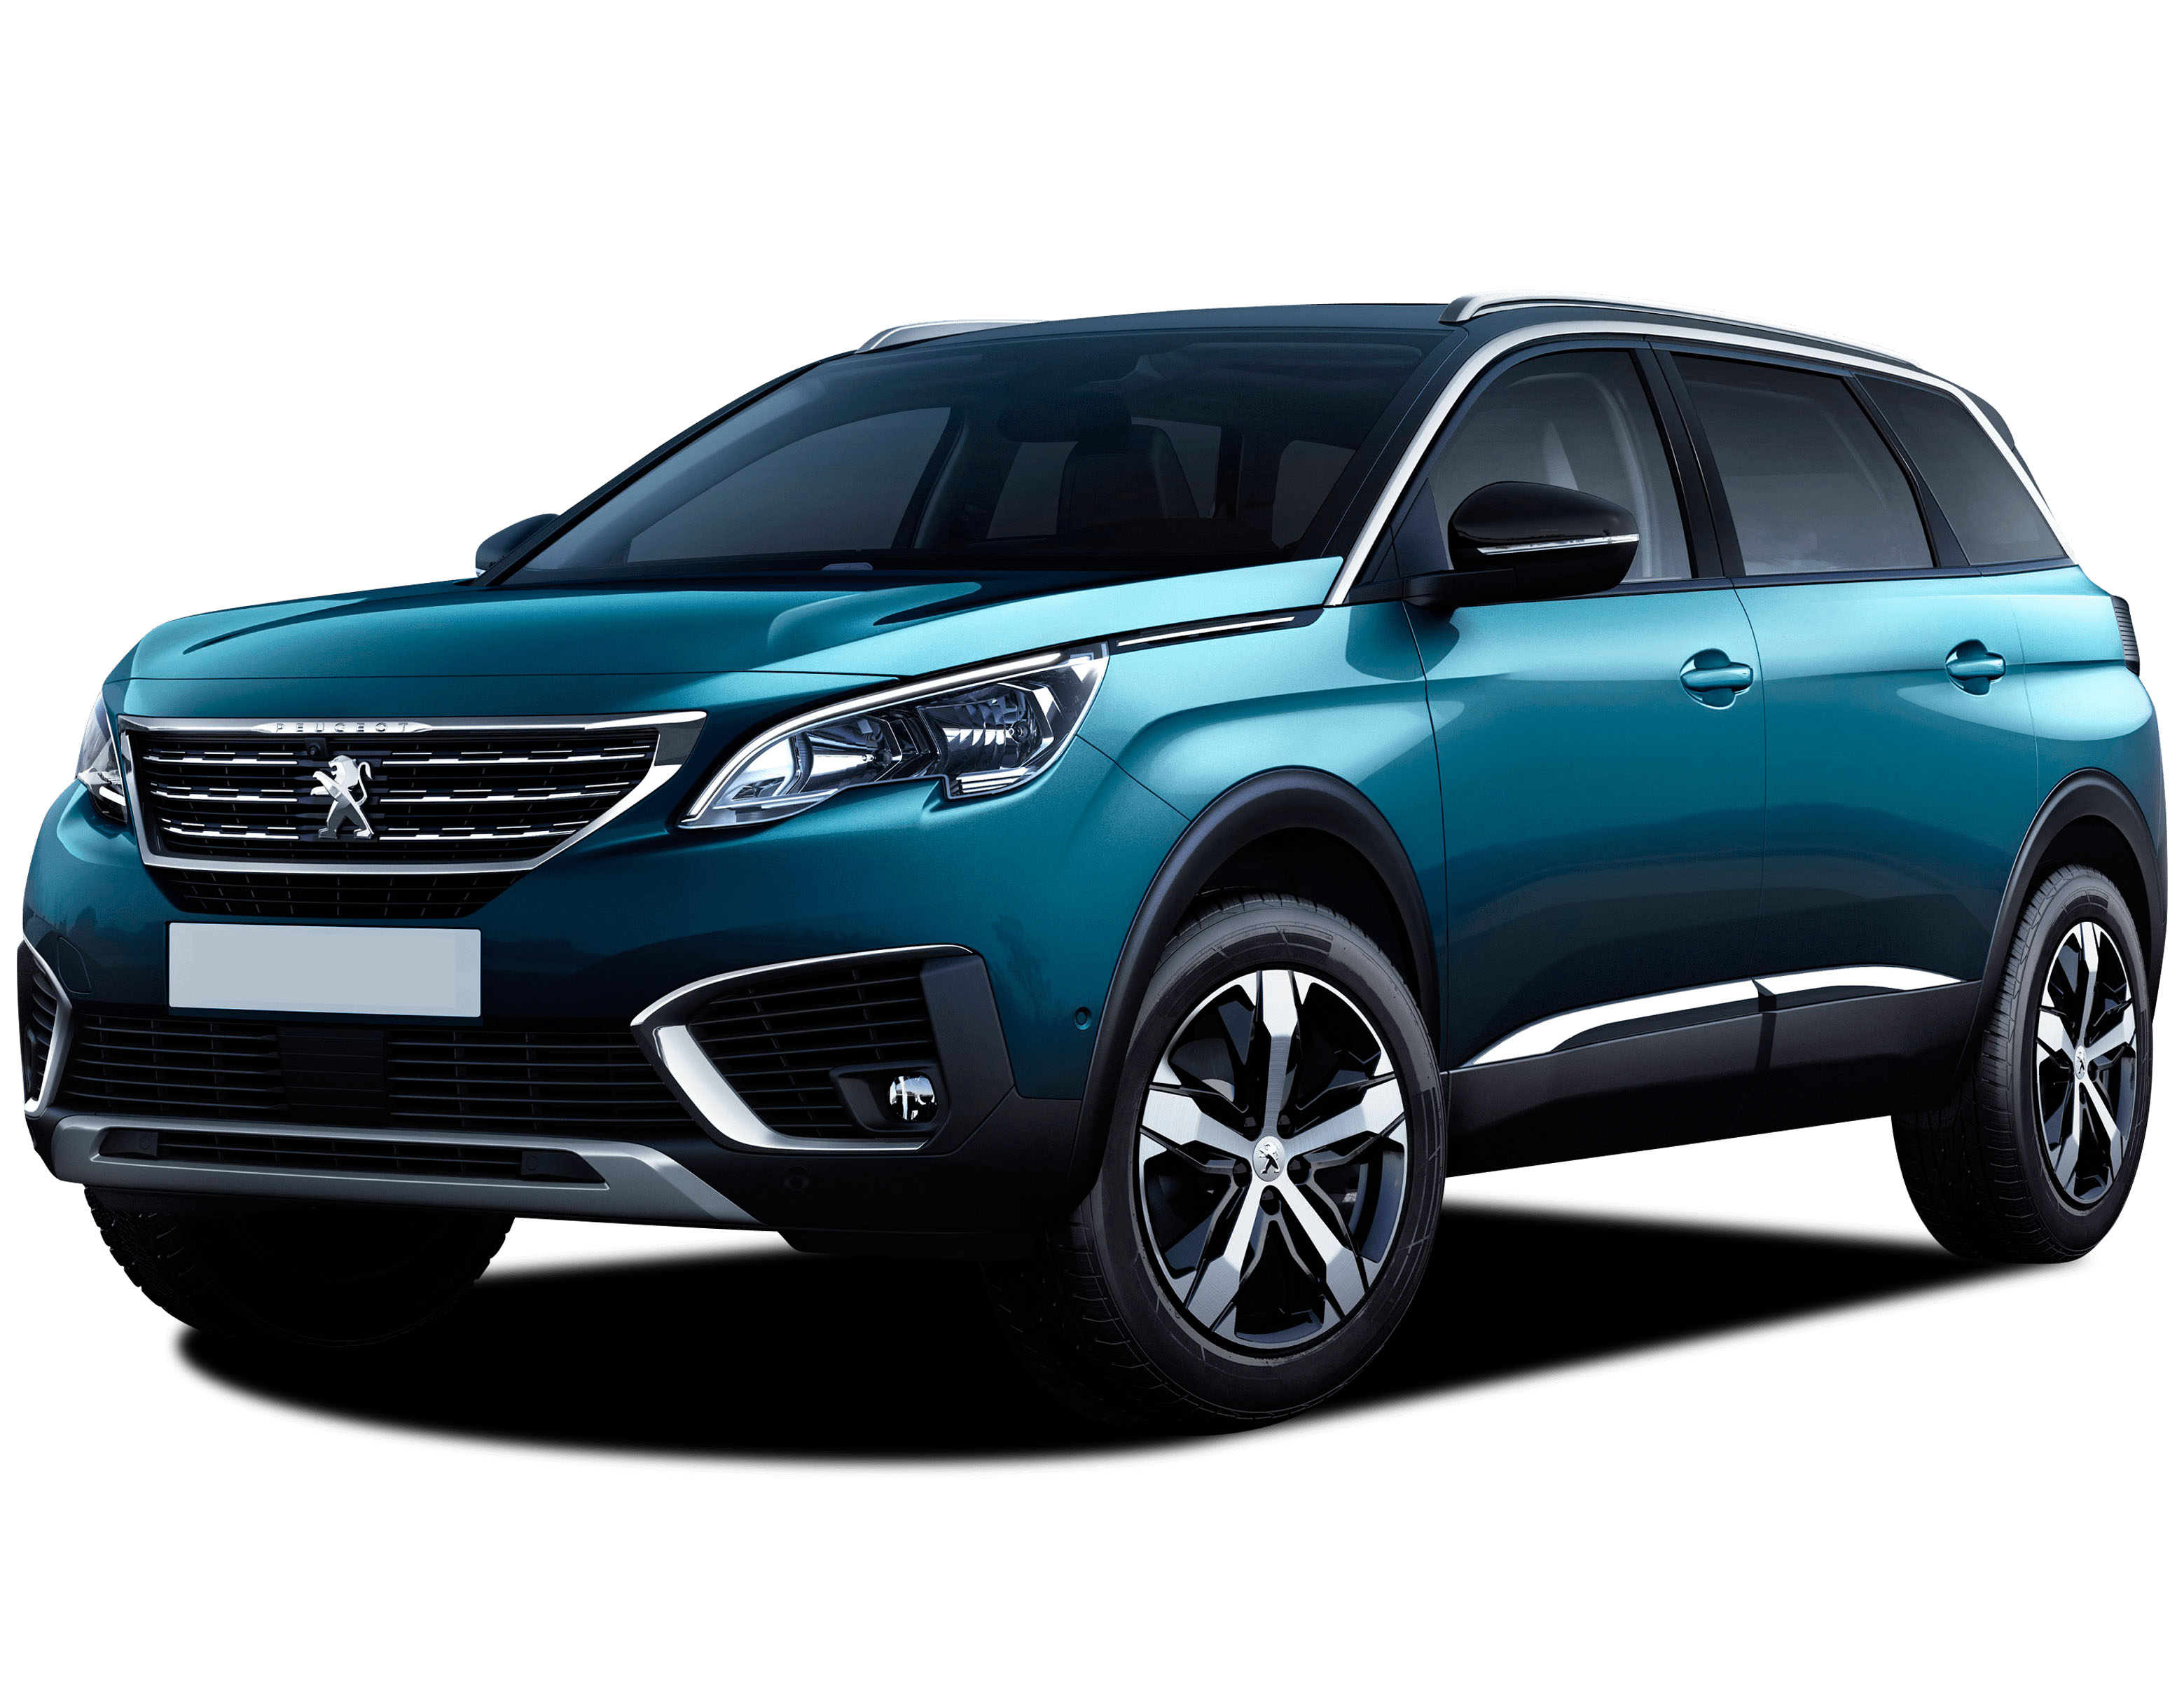 PEUGEOT 5008 1.5 BLUE HDI ALLURE SELECTİON